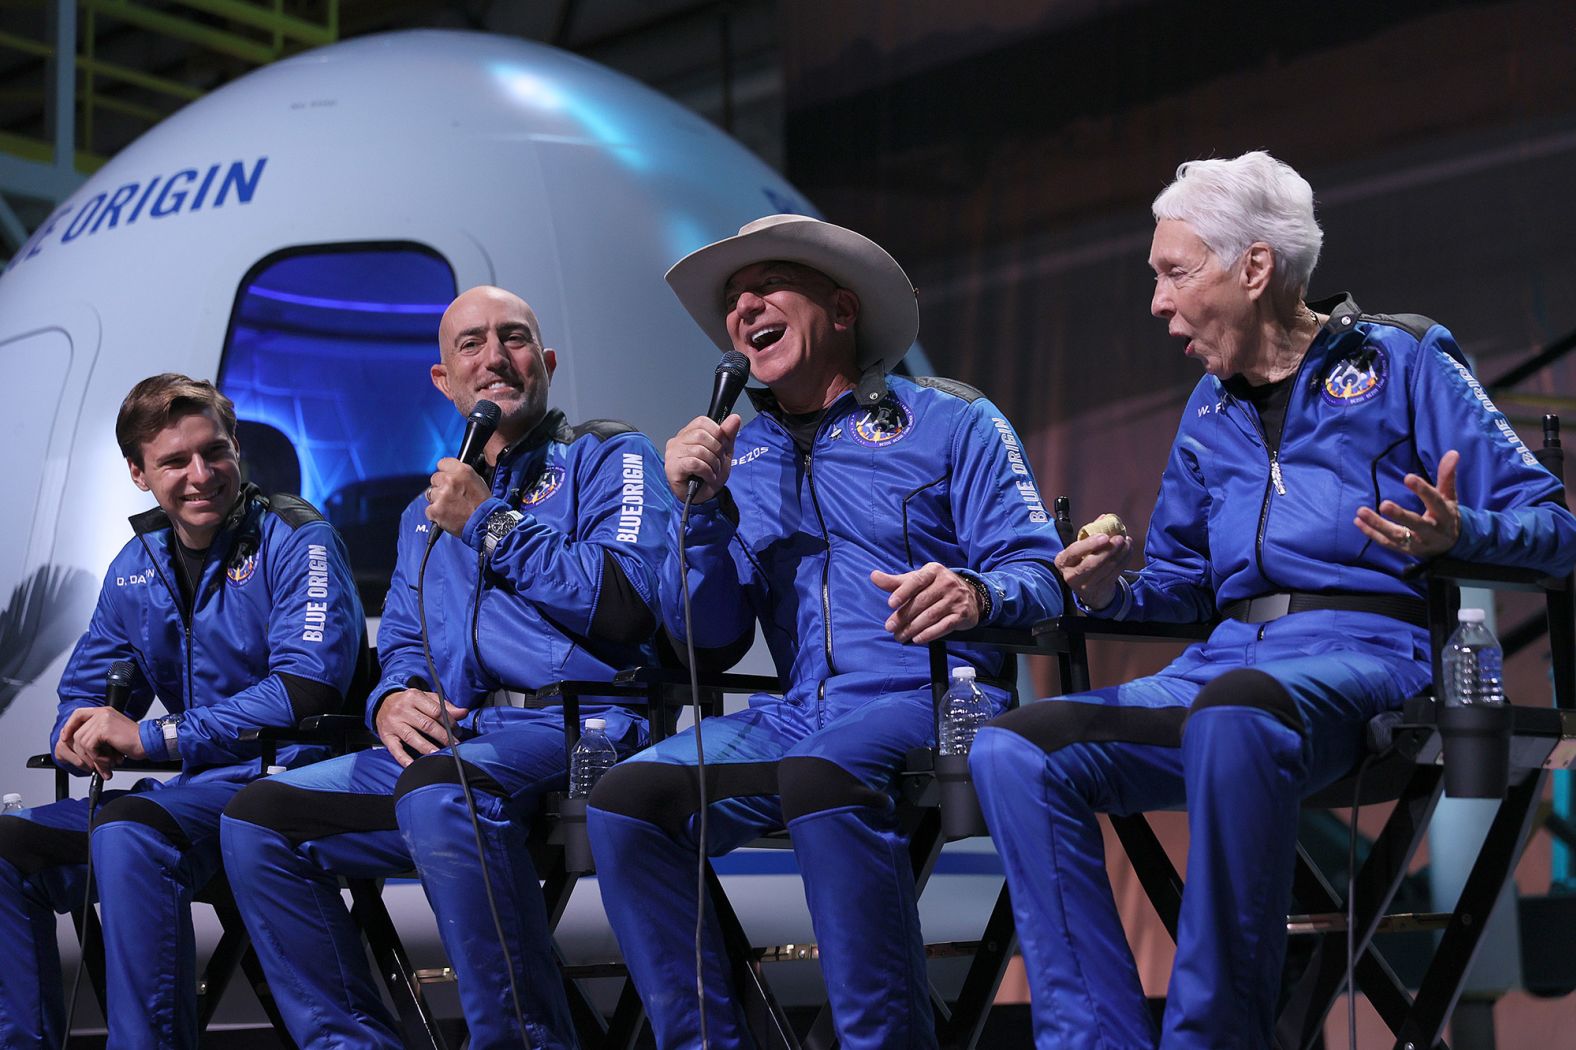 From left, Oliver Daemen, Mark Bezos, Jeff Bezos and Wally Funk hold a news conference after flying into space. "My expectations were high, and they were dramatically exceeded," Jeff Bezos said.